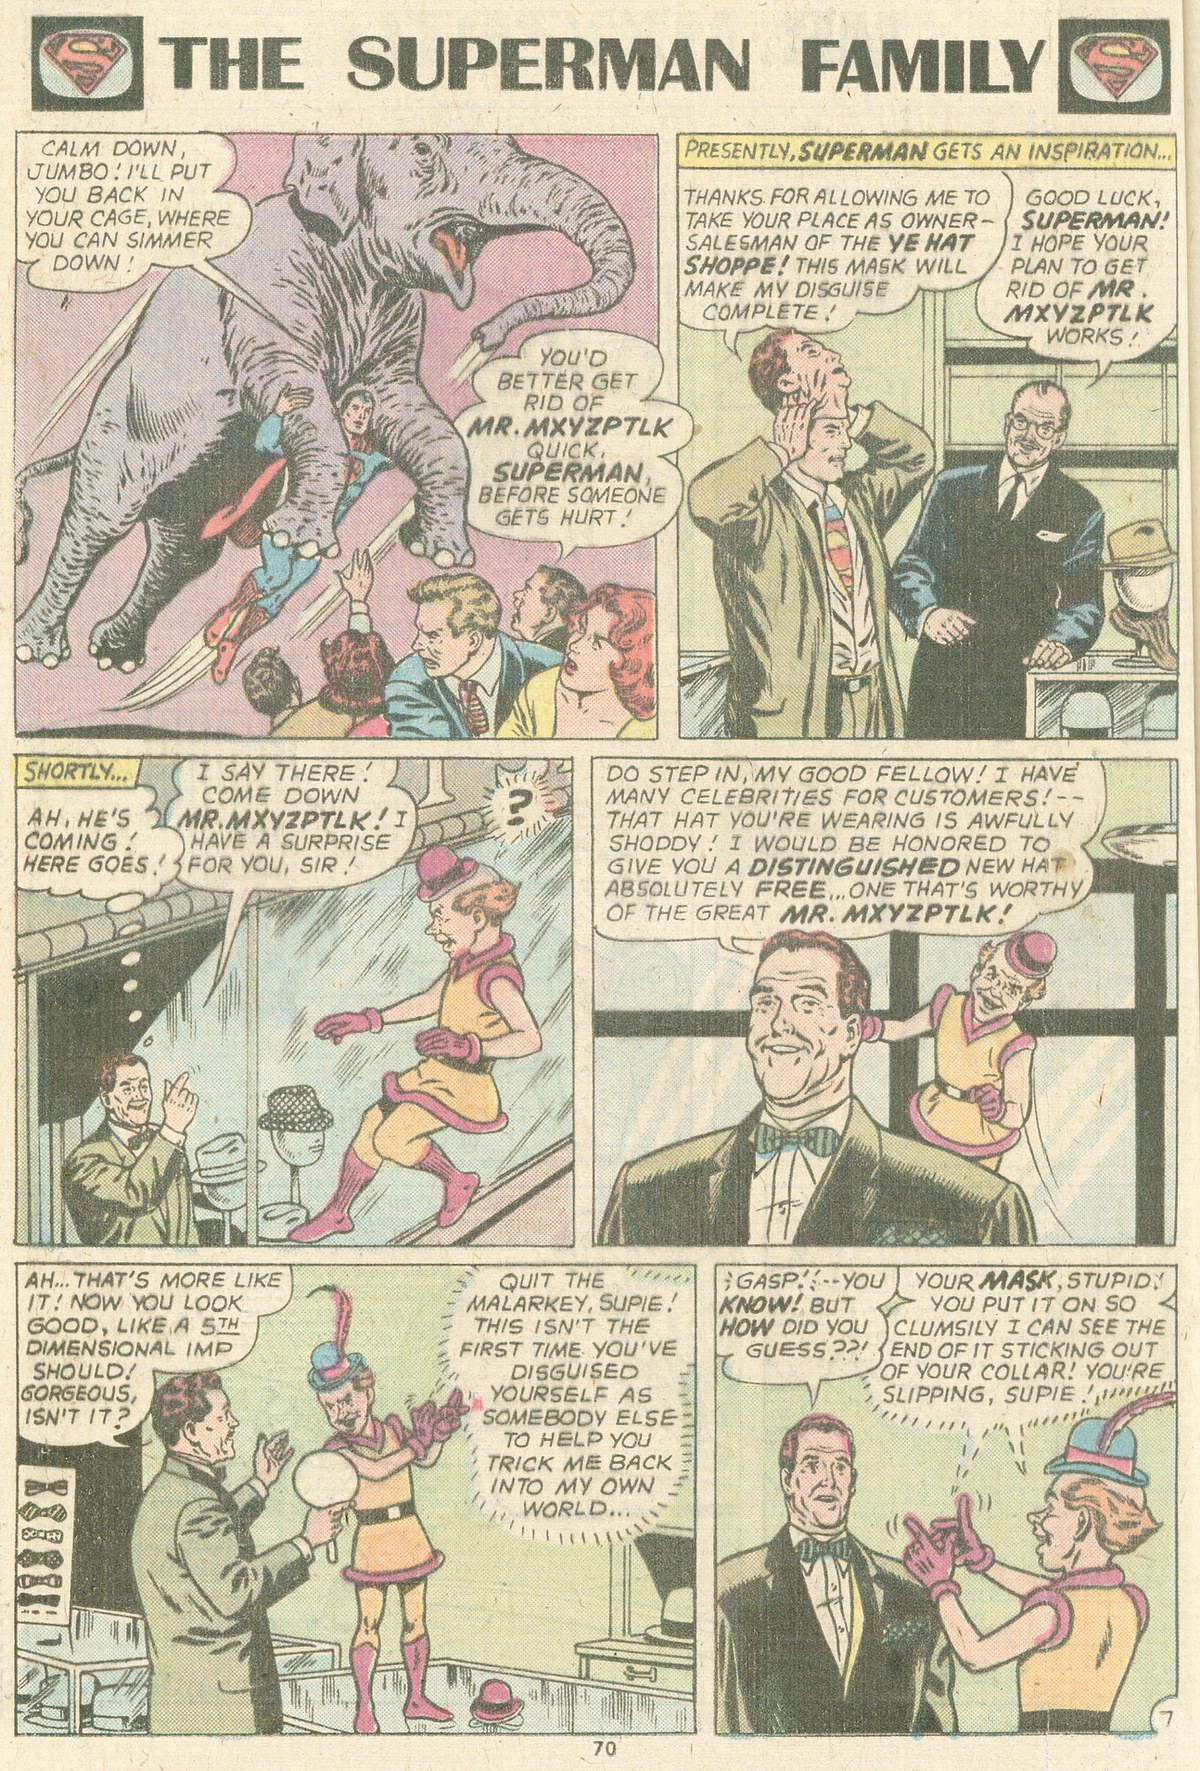 The Superman Family 168 Page 70